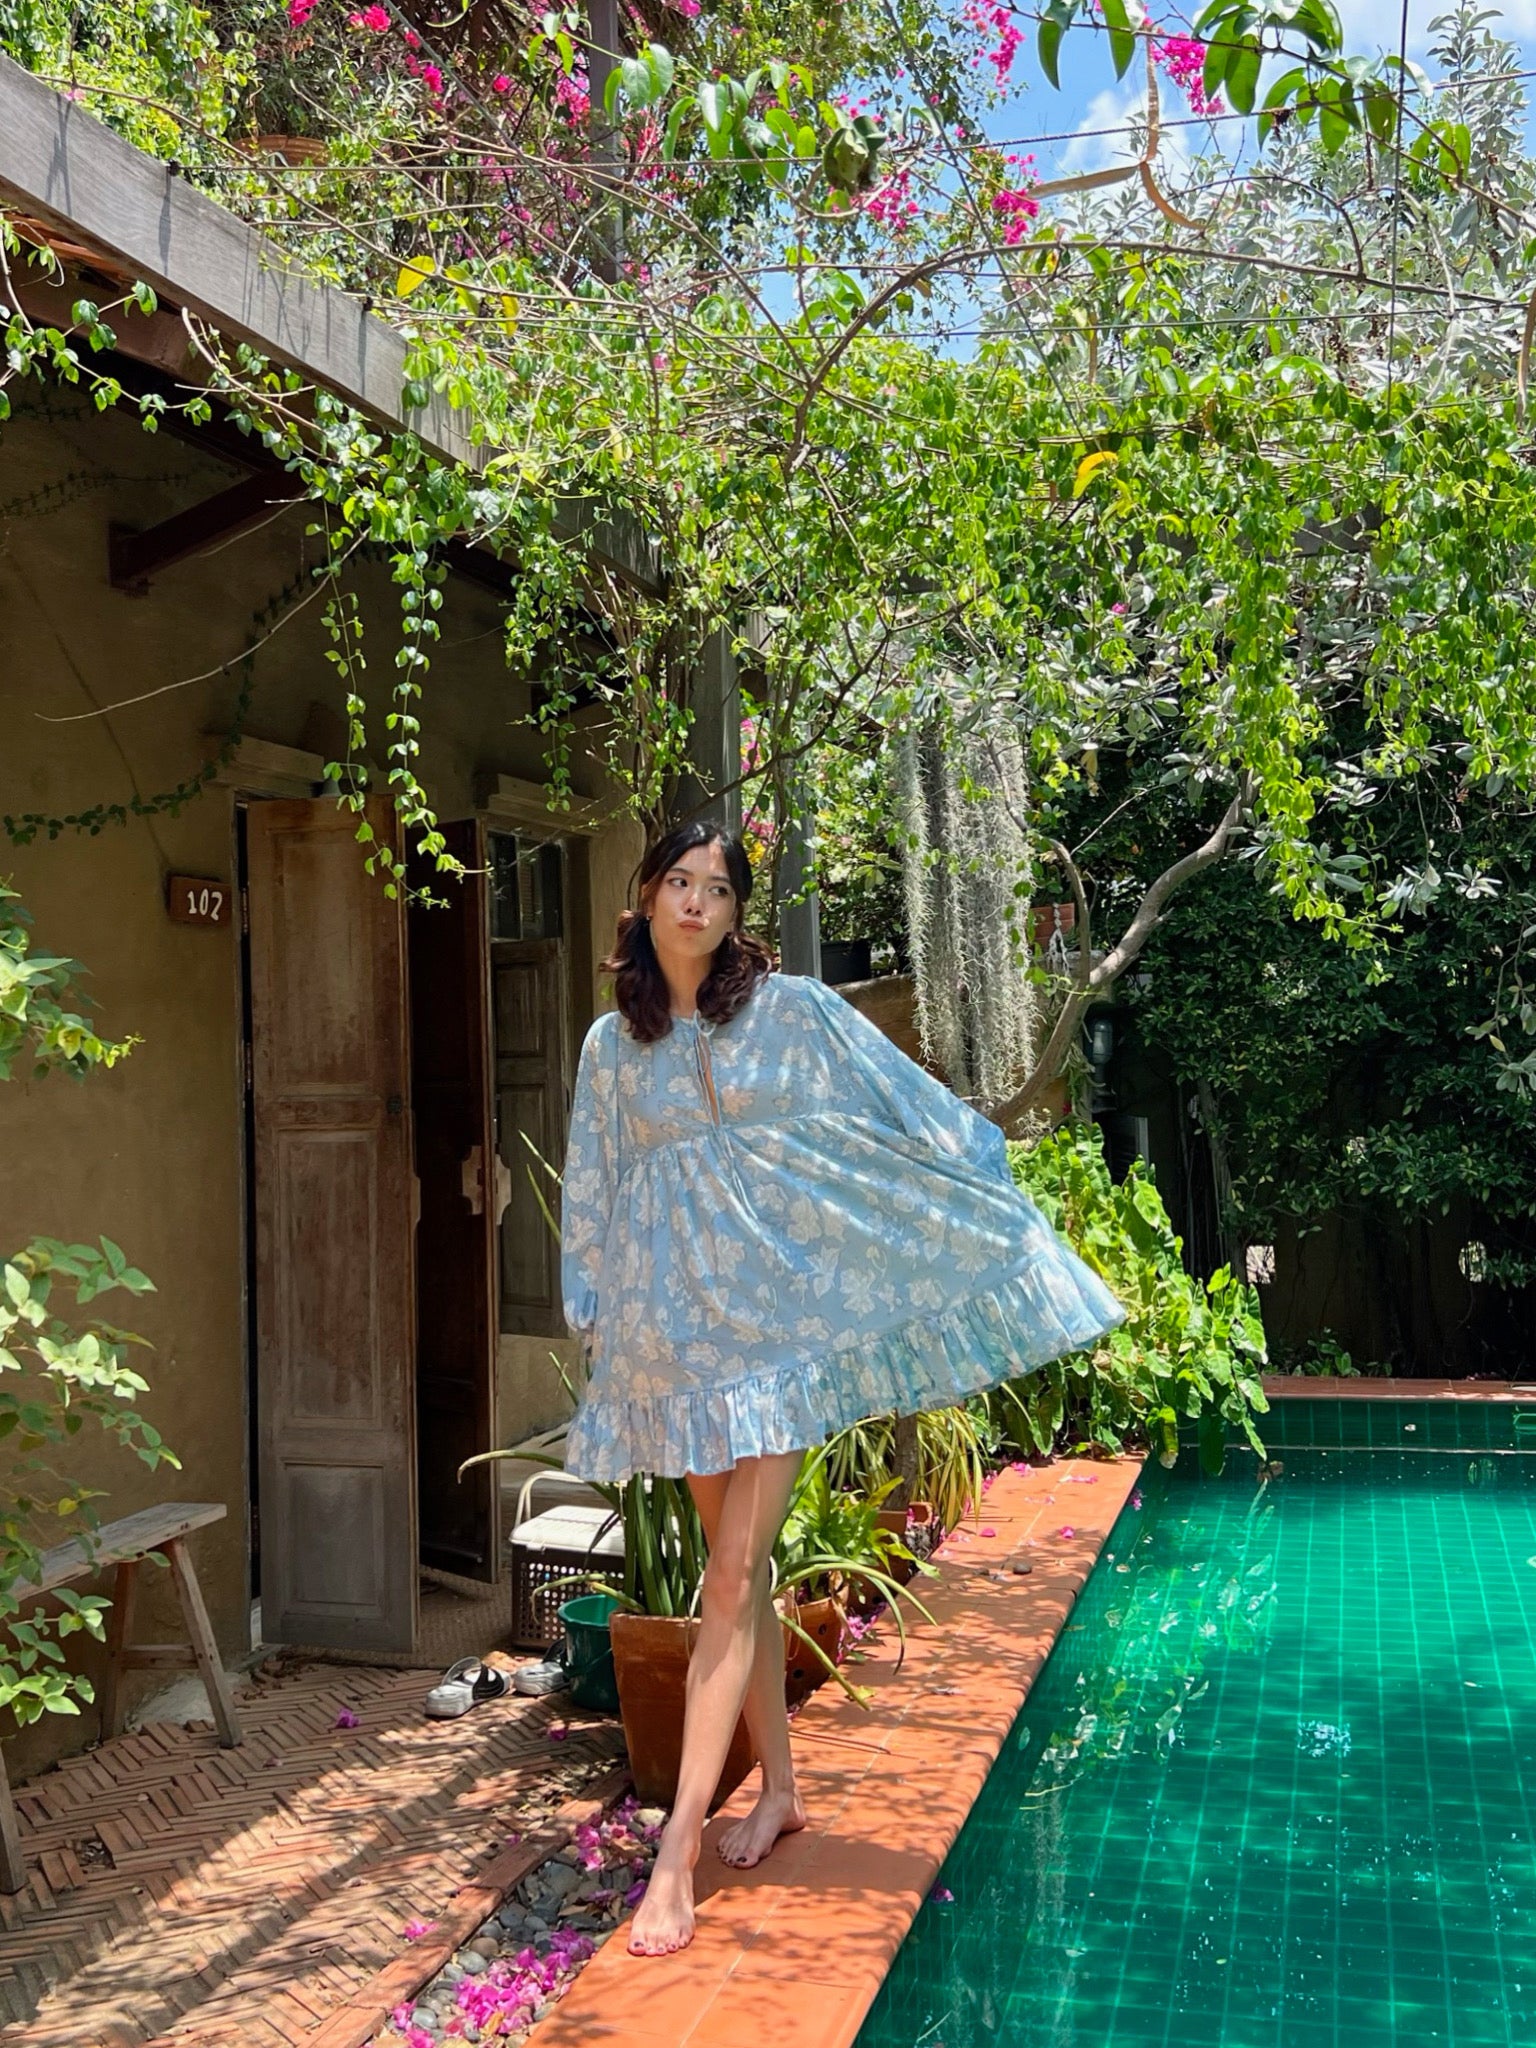 Shop Coco de Chom Lola Bohemian Mini Dress in Beautiful Blue Sky - A Truly Unique Limited Edition Piece. Handcrafted with Wooden Blocks on Fine Cotton Voile, Showcasing a Dreamy Block Printed Pattern Inspired by Bougainvillea Flowers and Vacations. Ideal for Beach Days, Vacations, and Boho Enthusiasts.